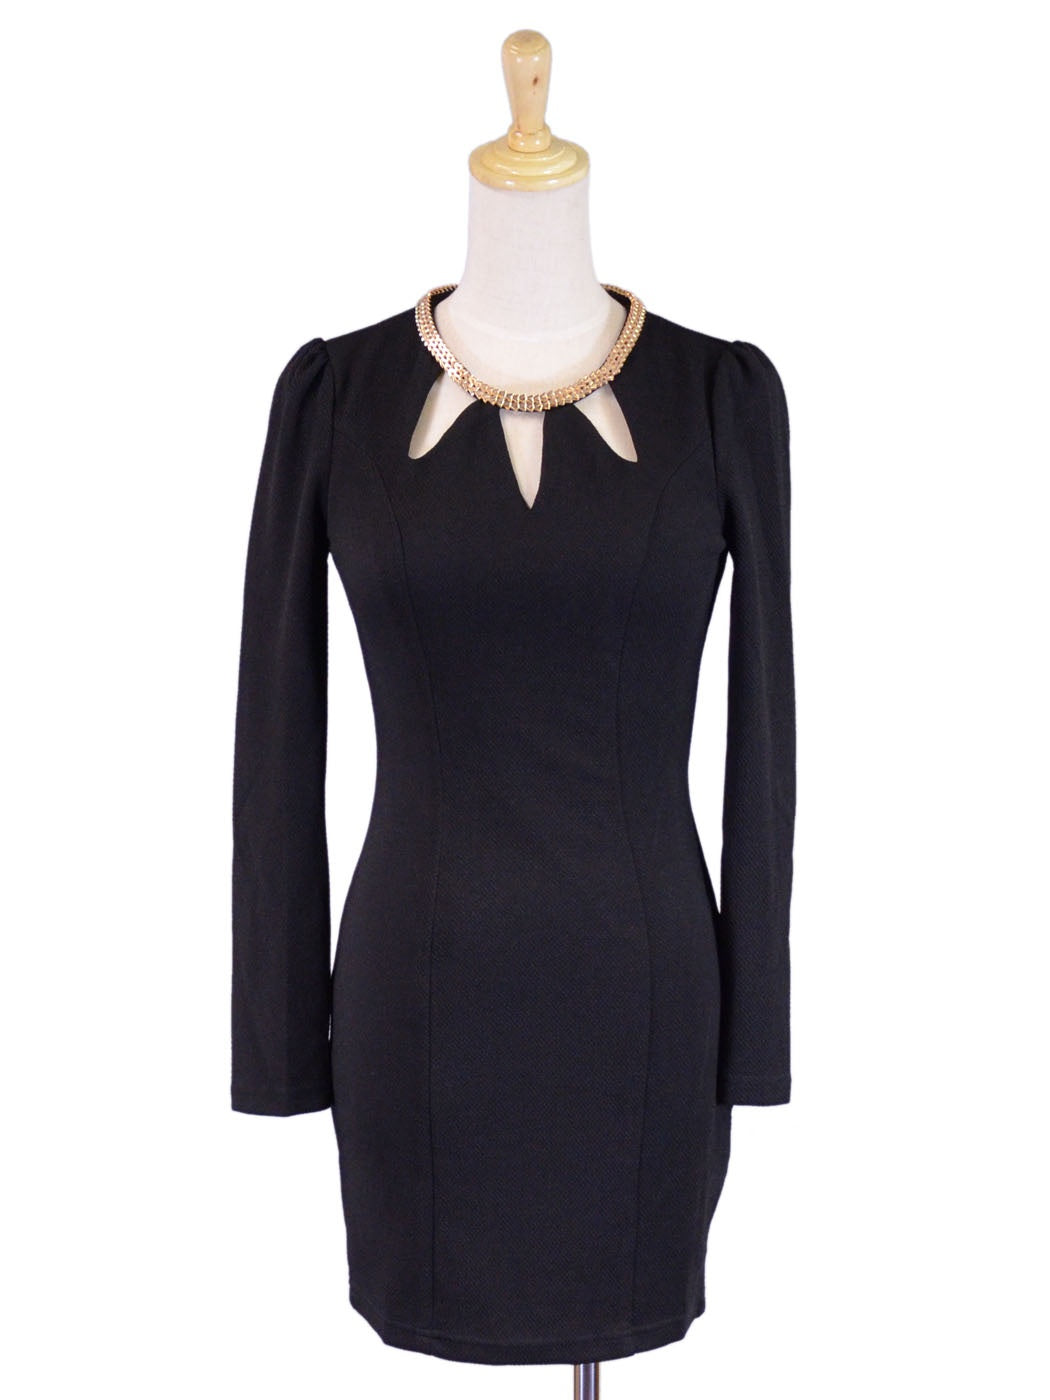 Cals Classic Evening Cocktail Necklace Cutout Bodycon Long Sleeve Formal Dress